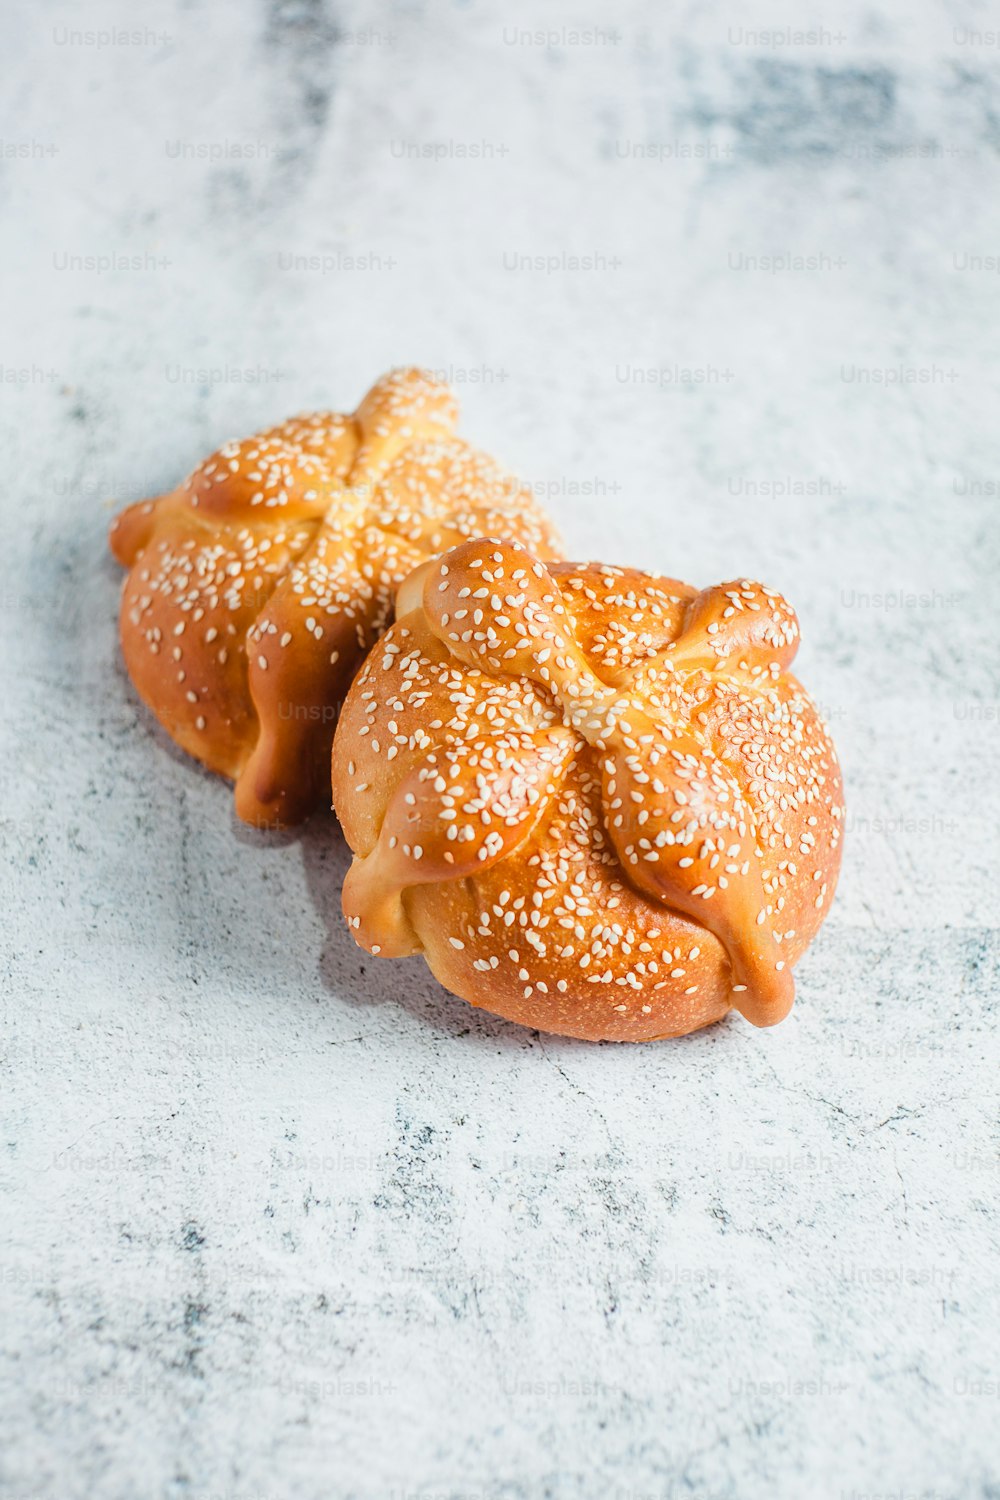 Pan de Muerto mexican bread traditional for day of the dead in Mexico